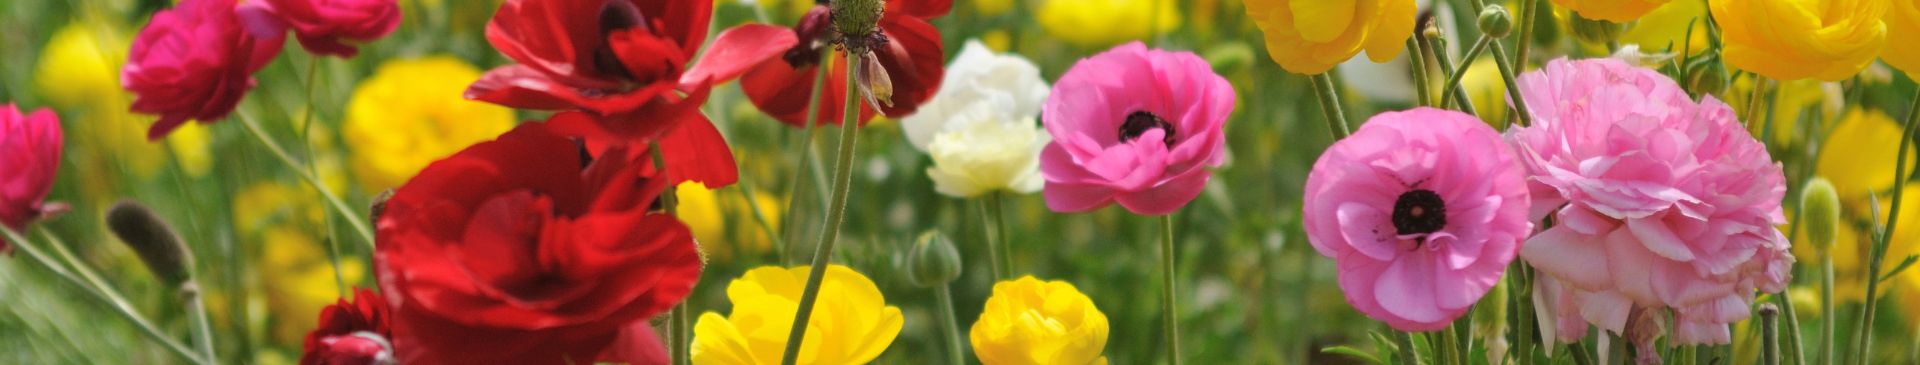 How to Grow Ranunculus Seeds | The Seed Collection